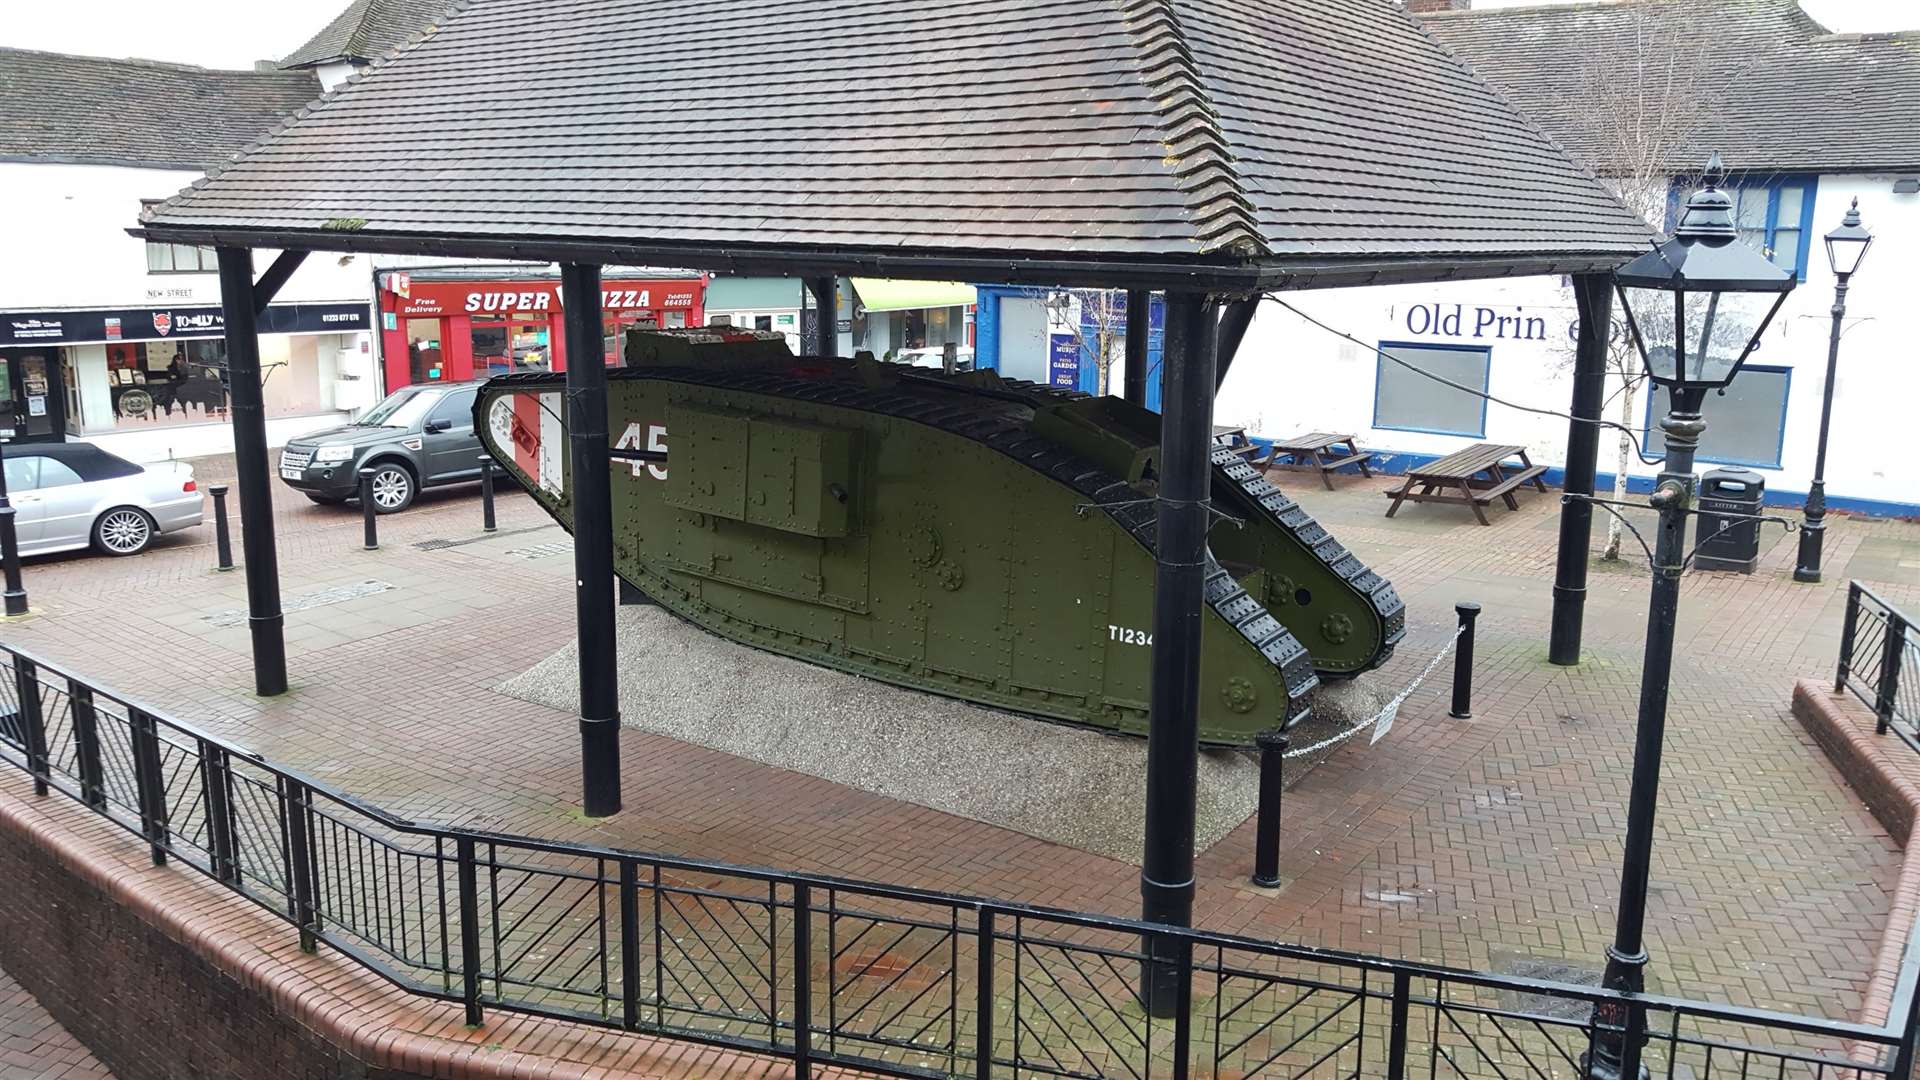 The tank resides under a specially made shelter, however this is not enough to maintain its condition